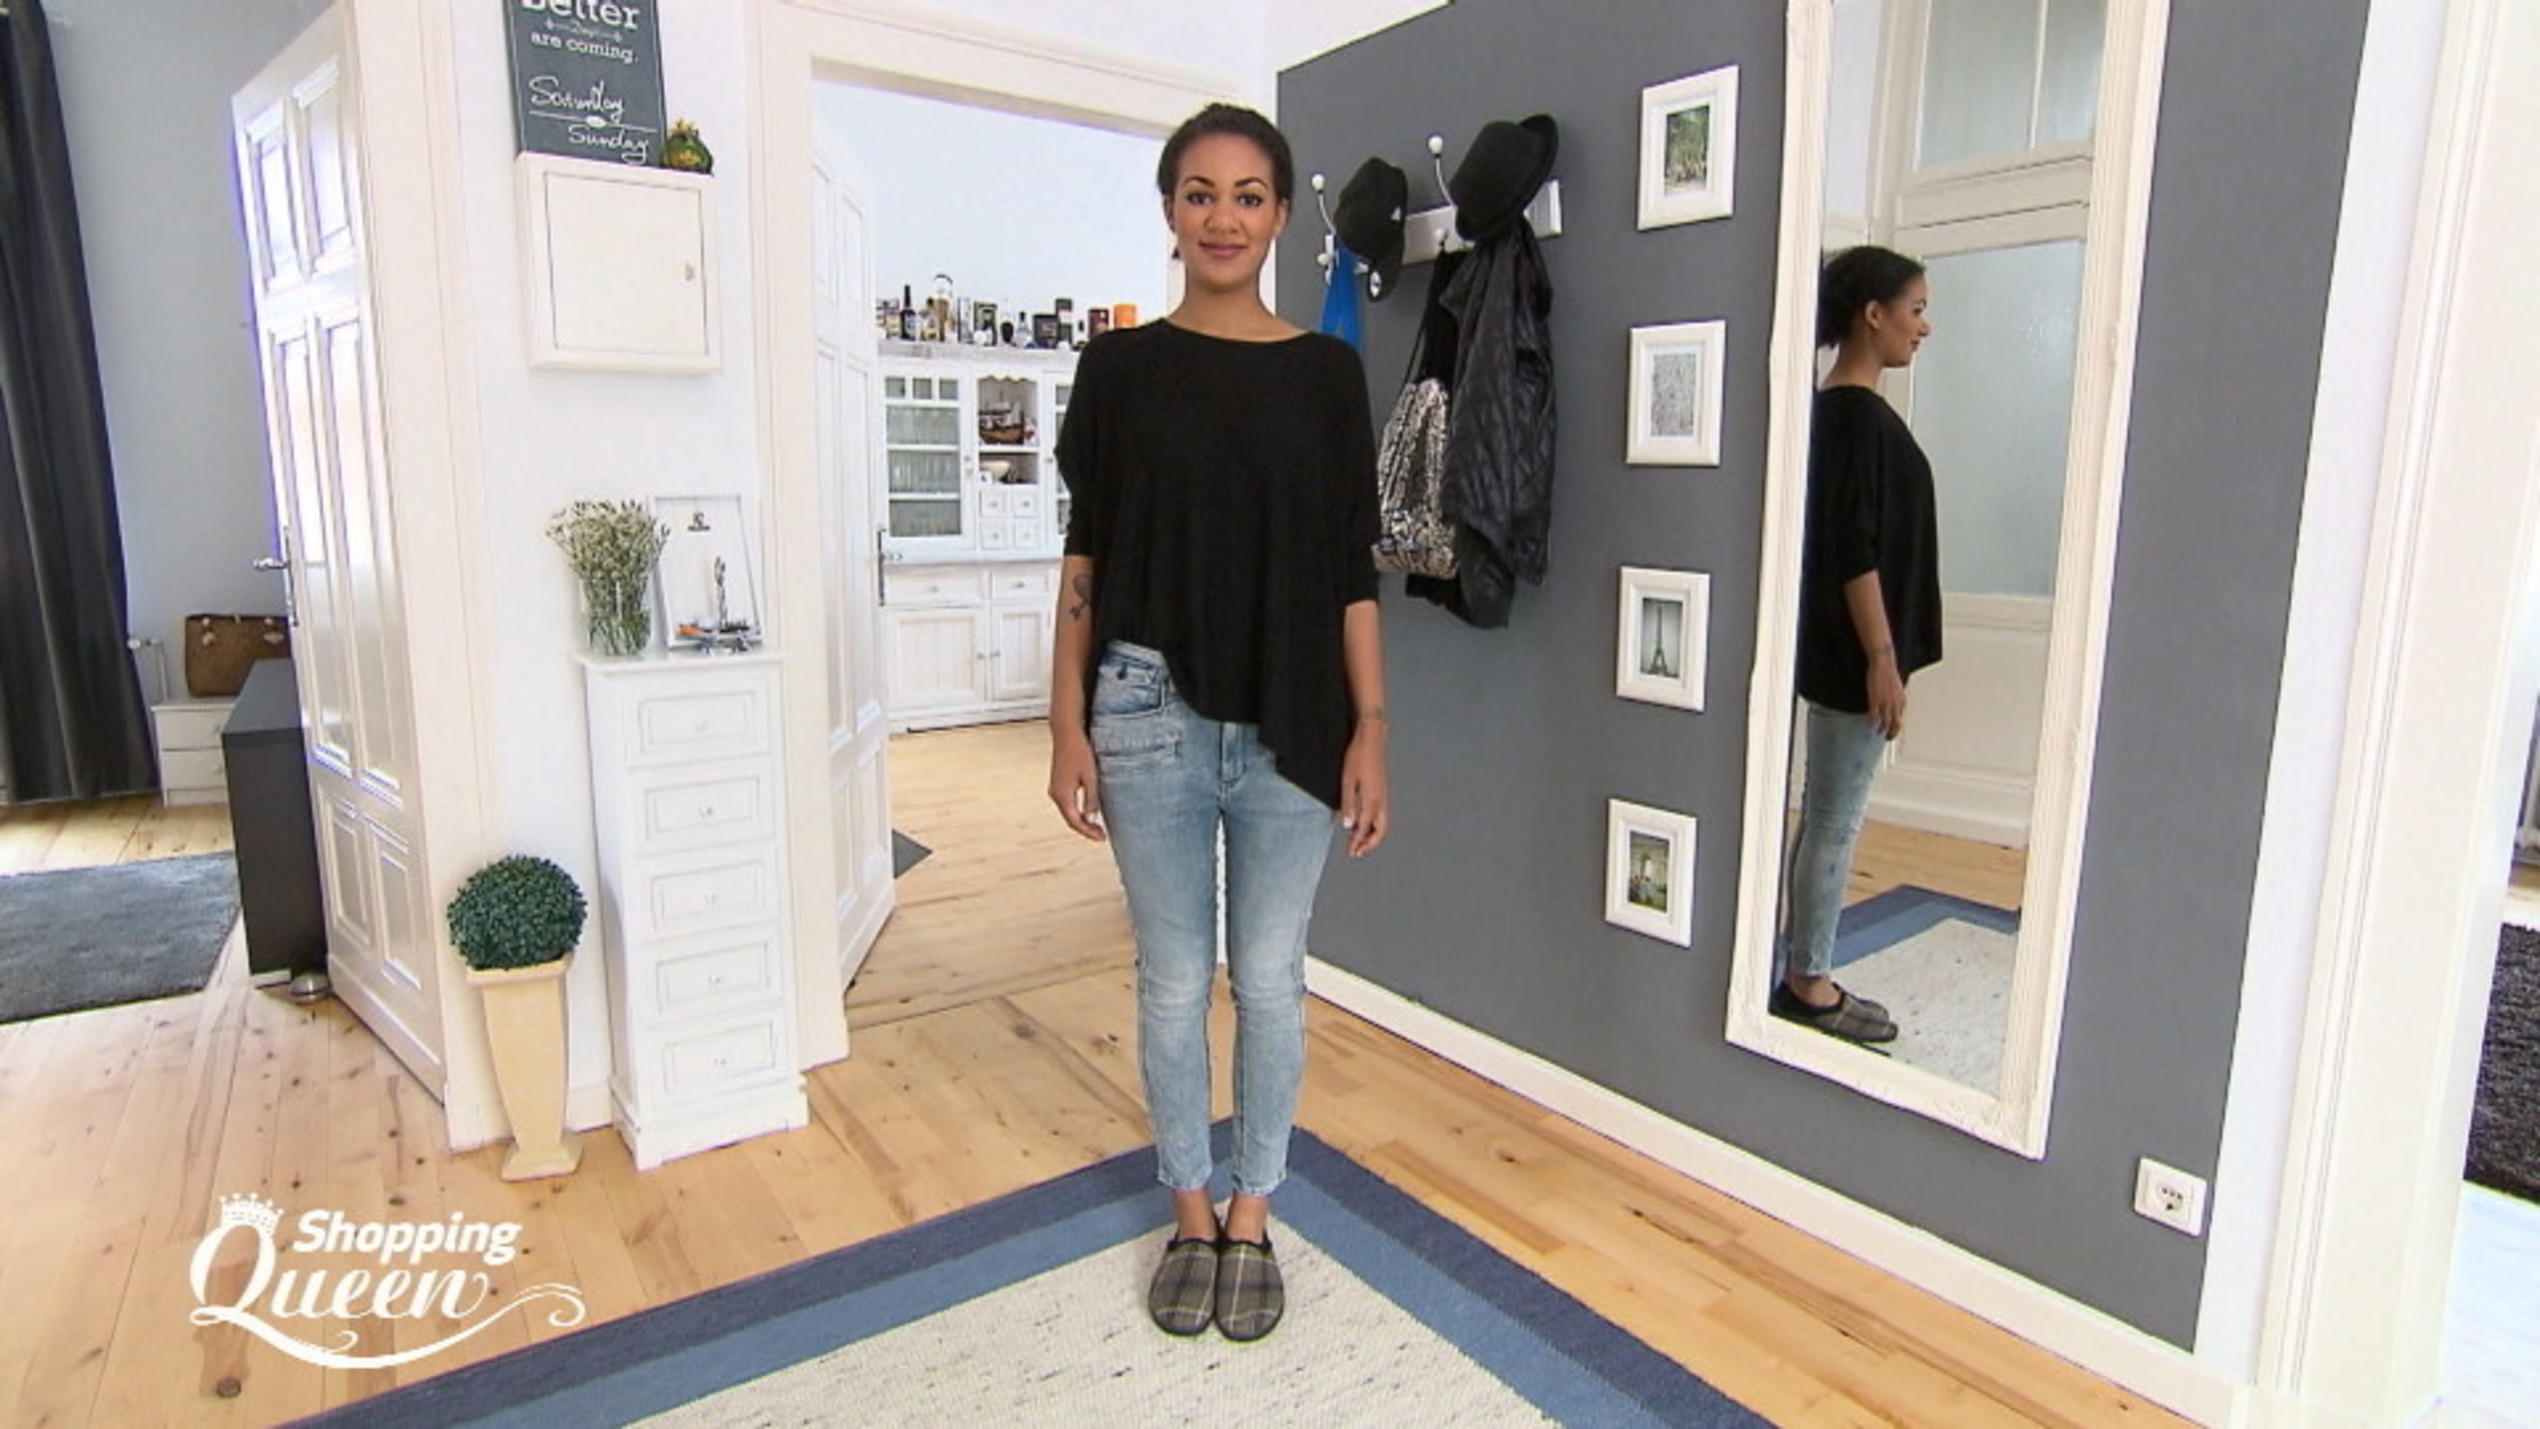 Michelle im Style-Check bei "Shopping Queen"